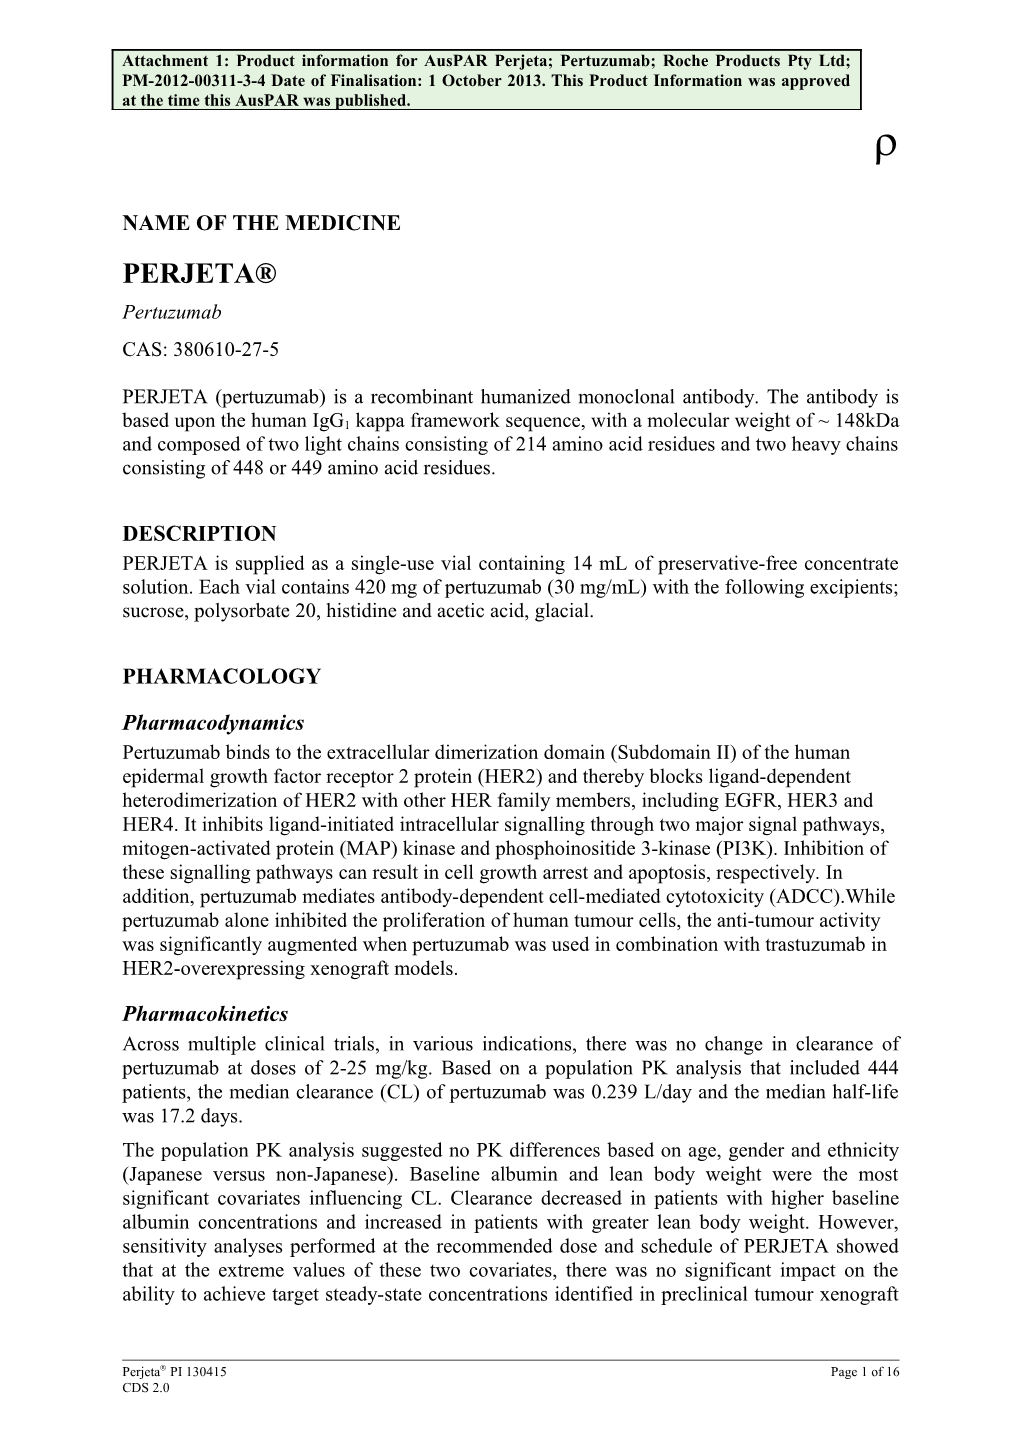 Attachment 1. Product Information for Pertuzumab